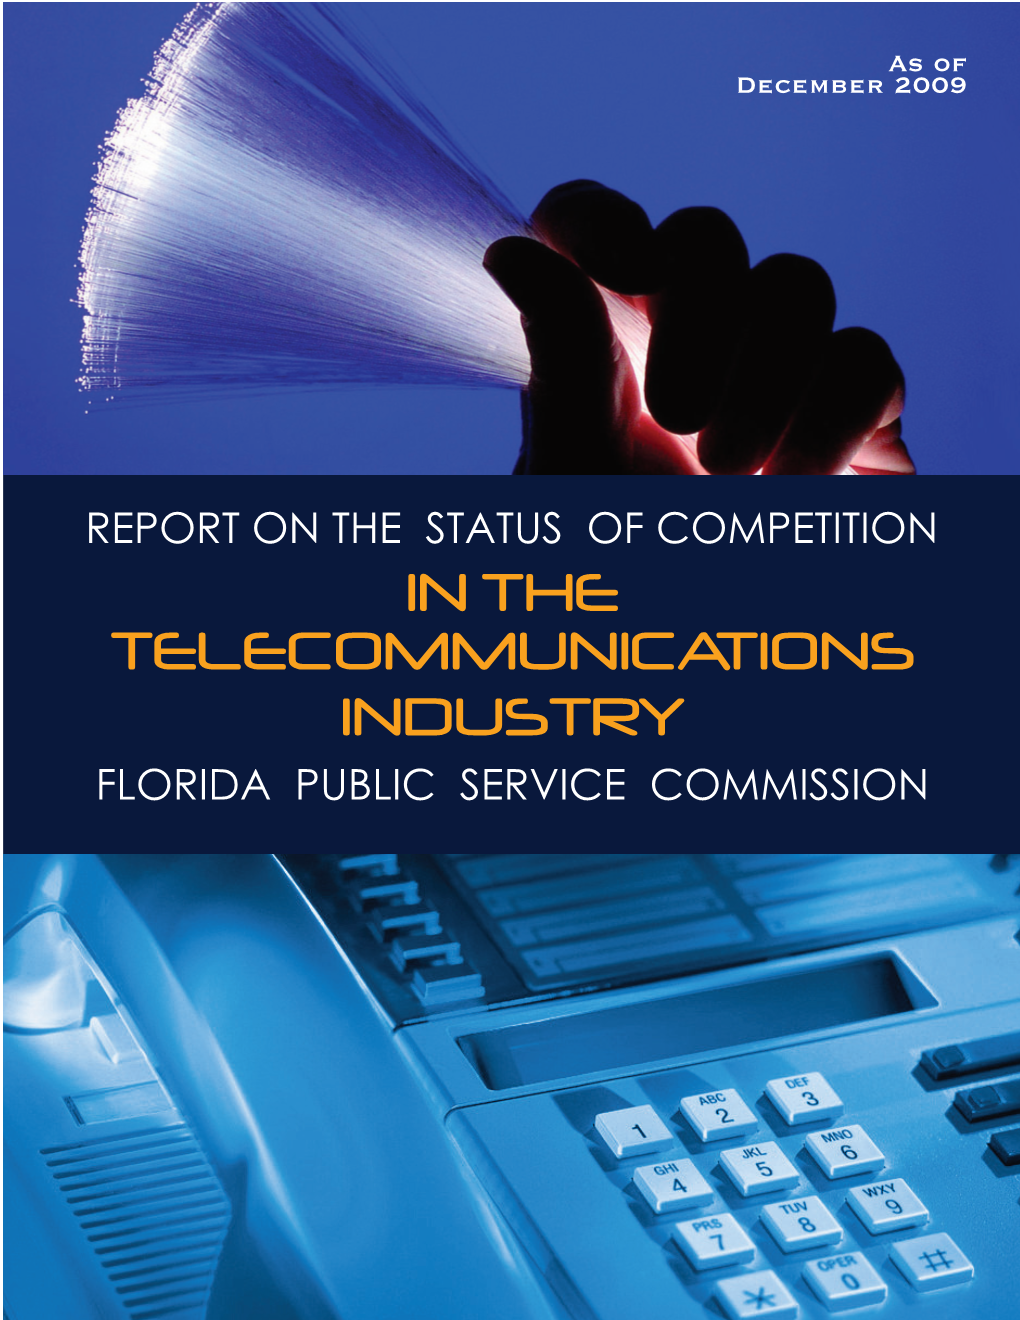 In the Telecommunications Industry Florida Public Service Commission